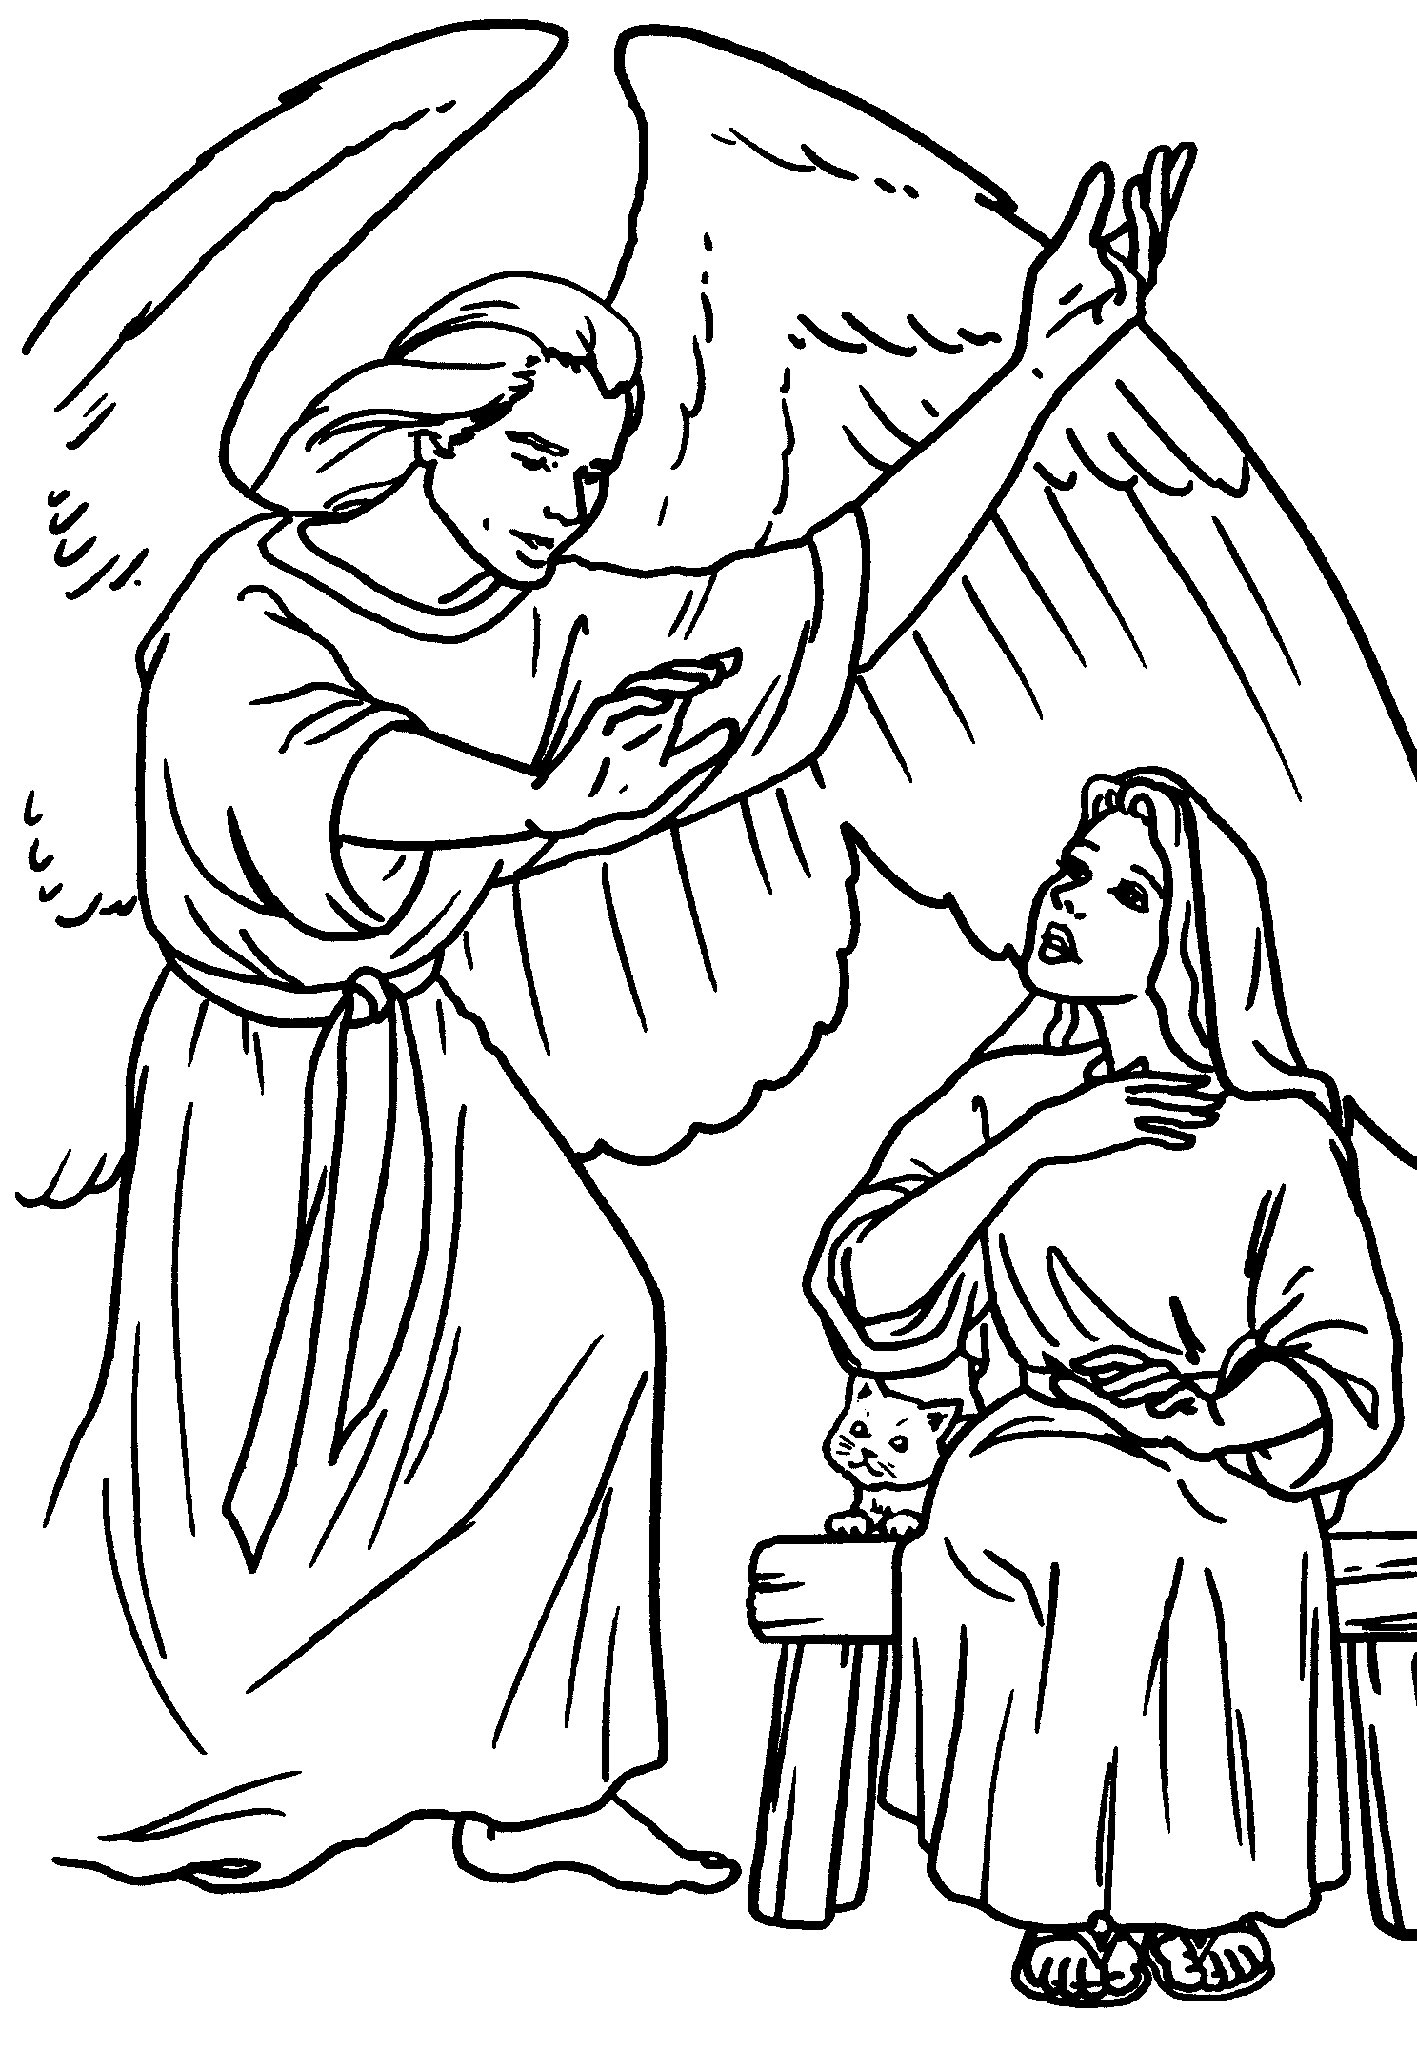 angel-appears-to-mary-coloring-page-sketch-coloring-page